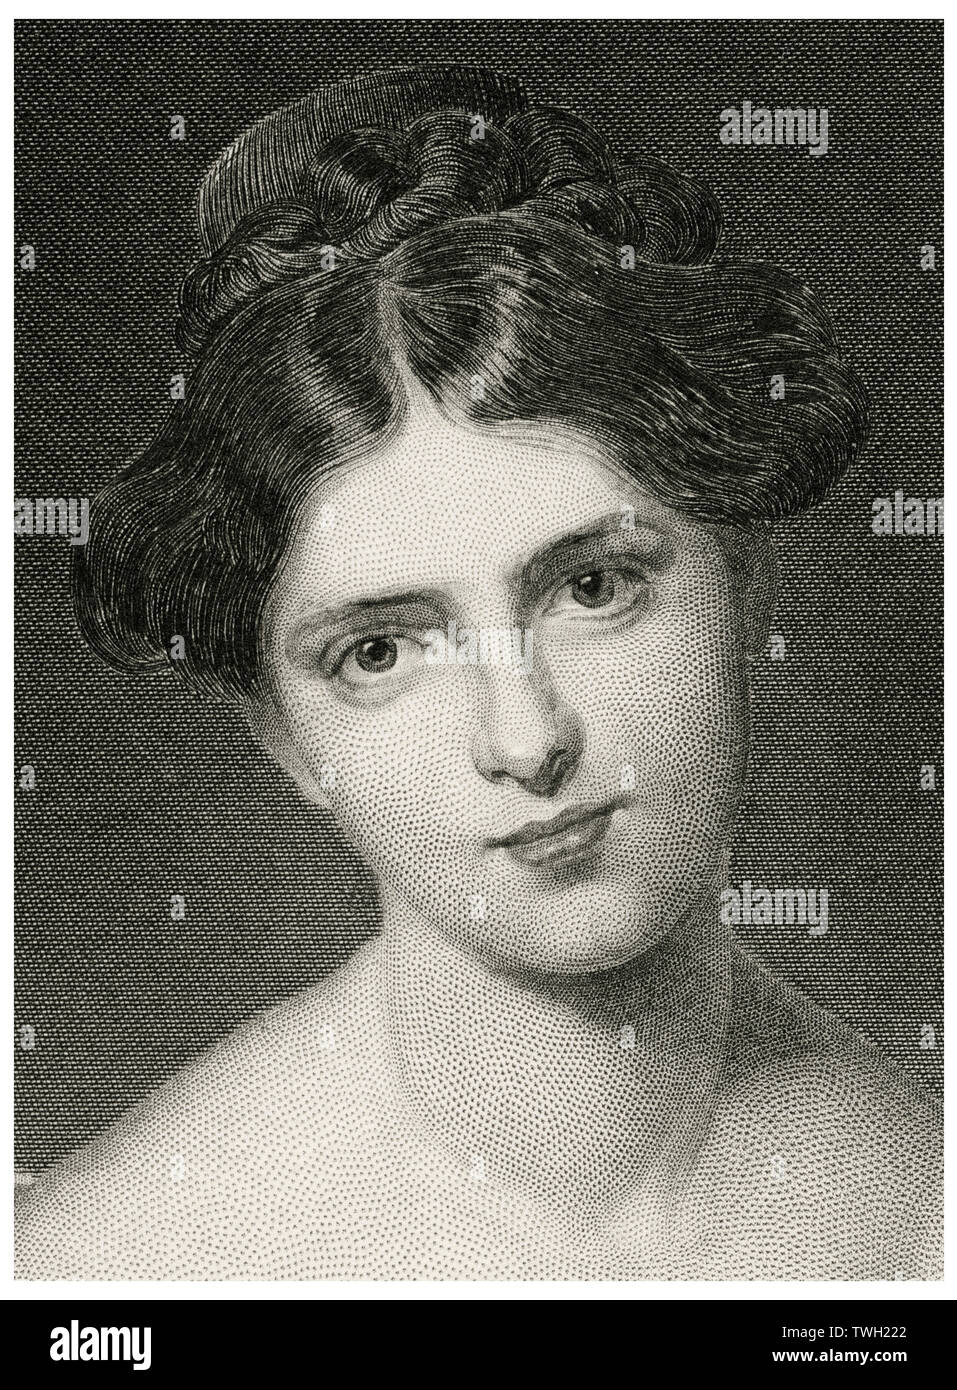 Frances Anne 'Fanny' Kemble (1809-93), British Actress, Head and Shoulders Portrait, Steel Engraving, Portrait Gallery of Eminent Men and Women of Europe and America by Evert A. Duyckinck, Published by Henry J. Johnson, Johnson, Wilson & Company, New York, 1873 Stock Photo